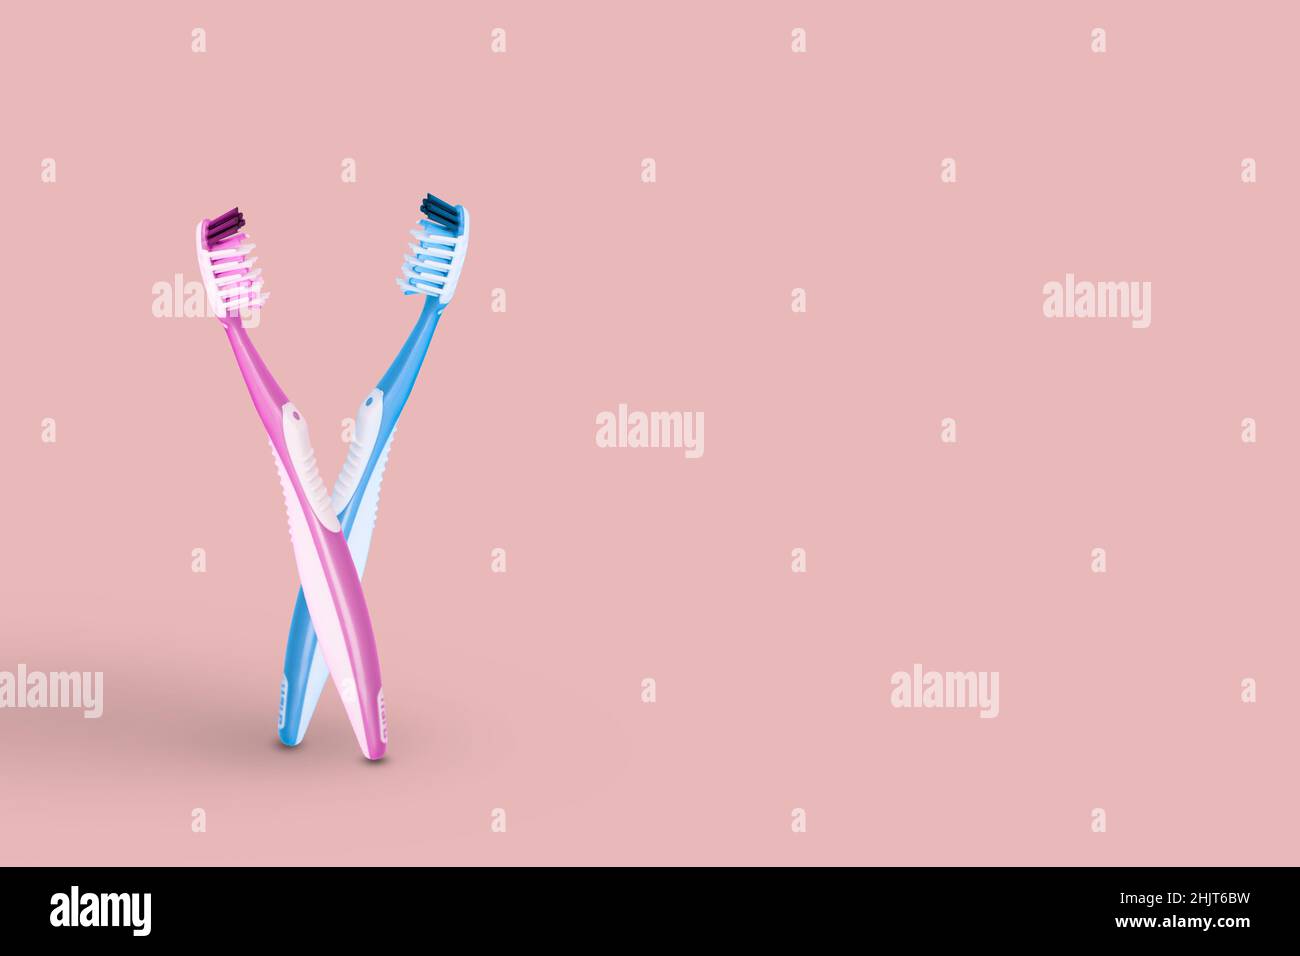 Creative idea made of two toothbrushes pink and blue bristles in an embrace, isolated on bright pink background. Copy space. Stock Photo